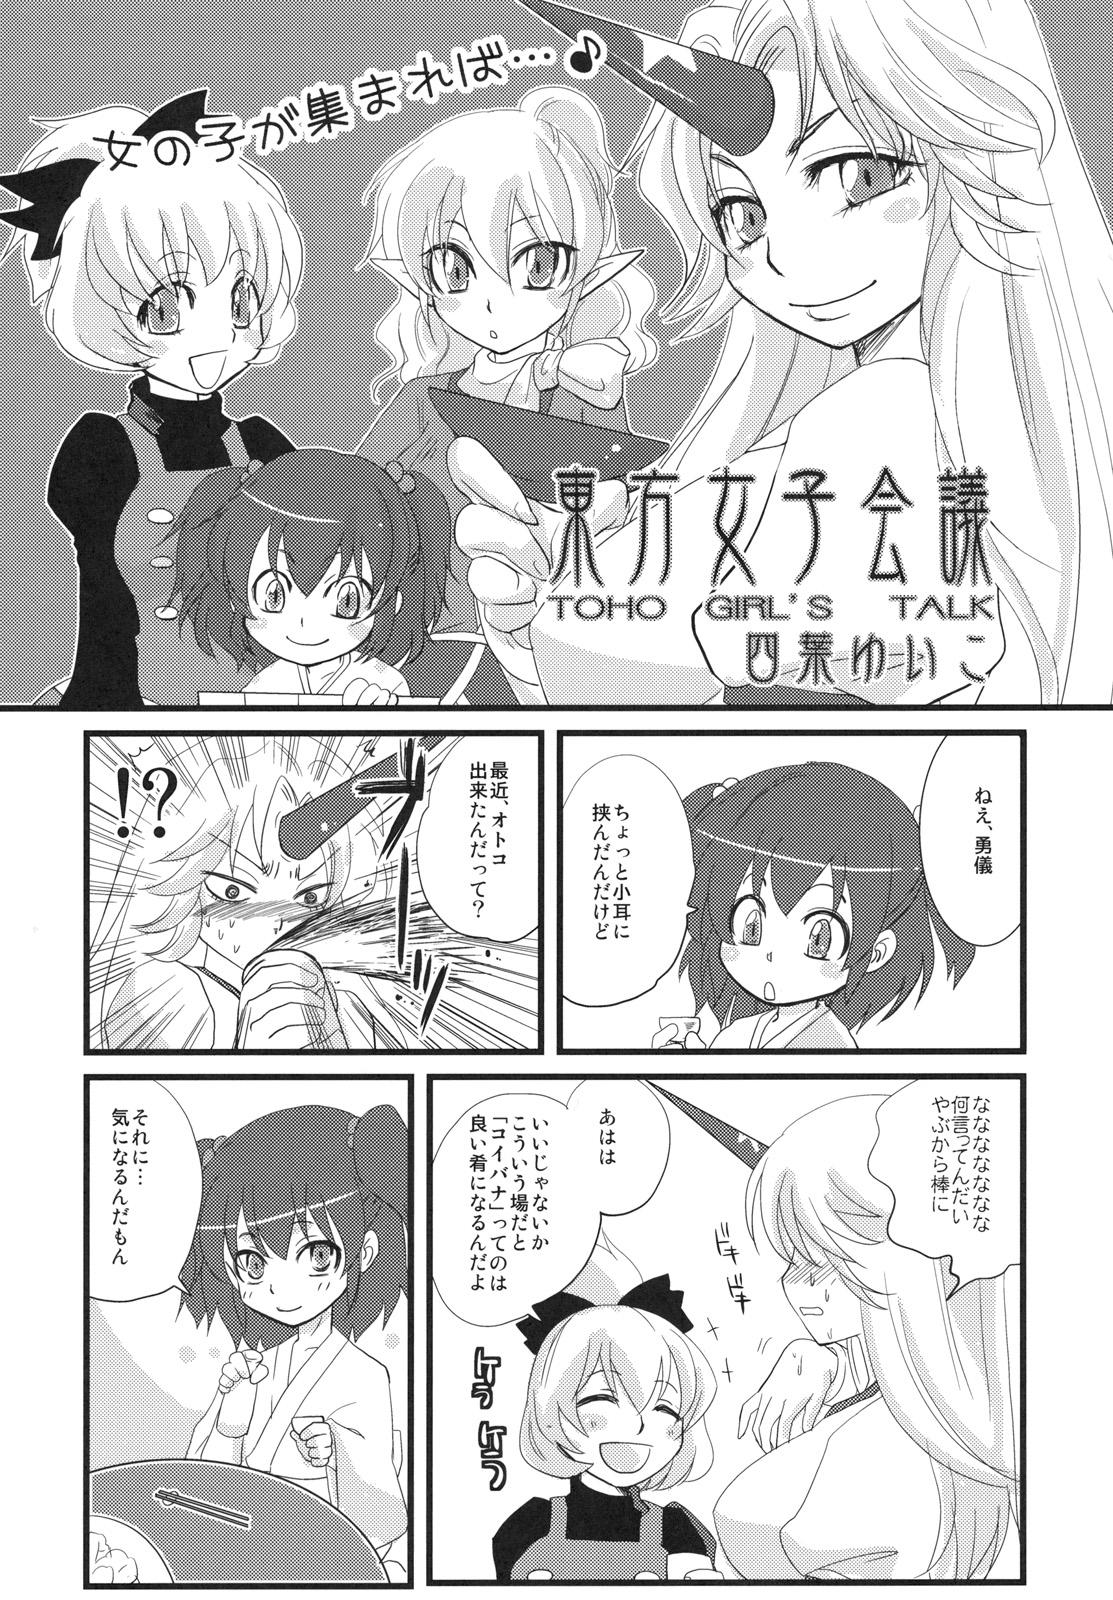 Livecams Touhou Under the Shrine - Touhou project Free Blow Job - Page 5